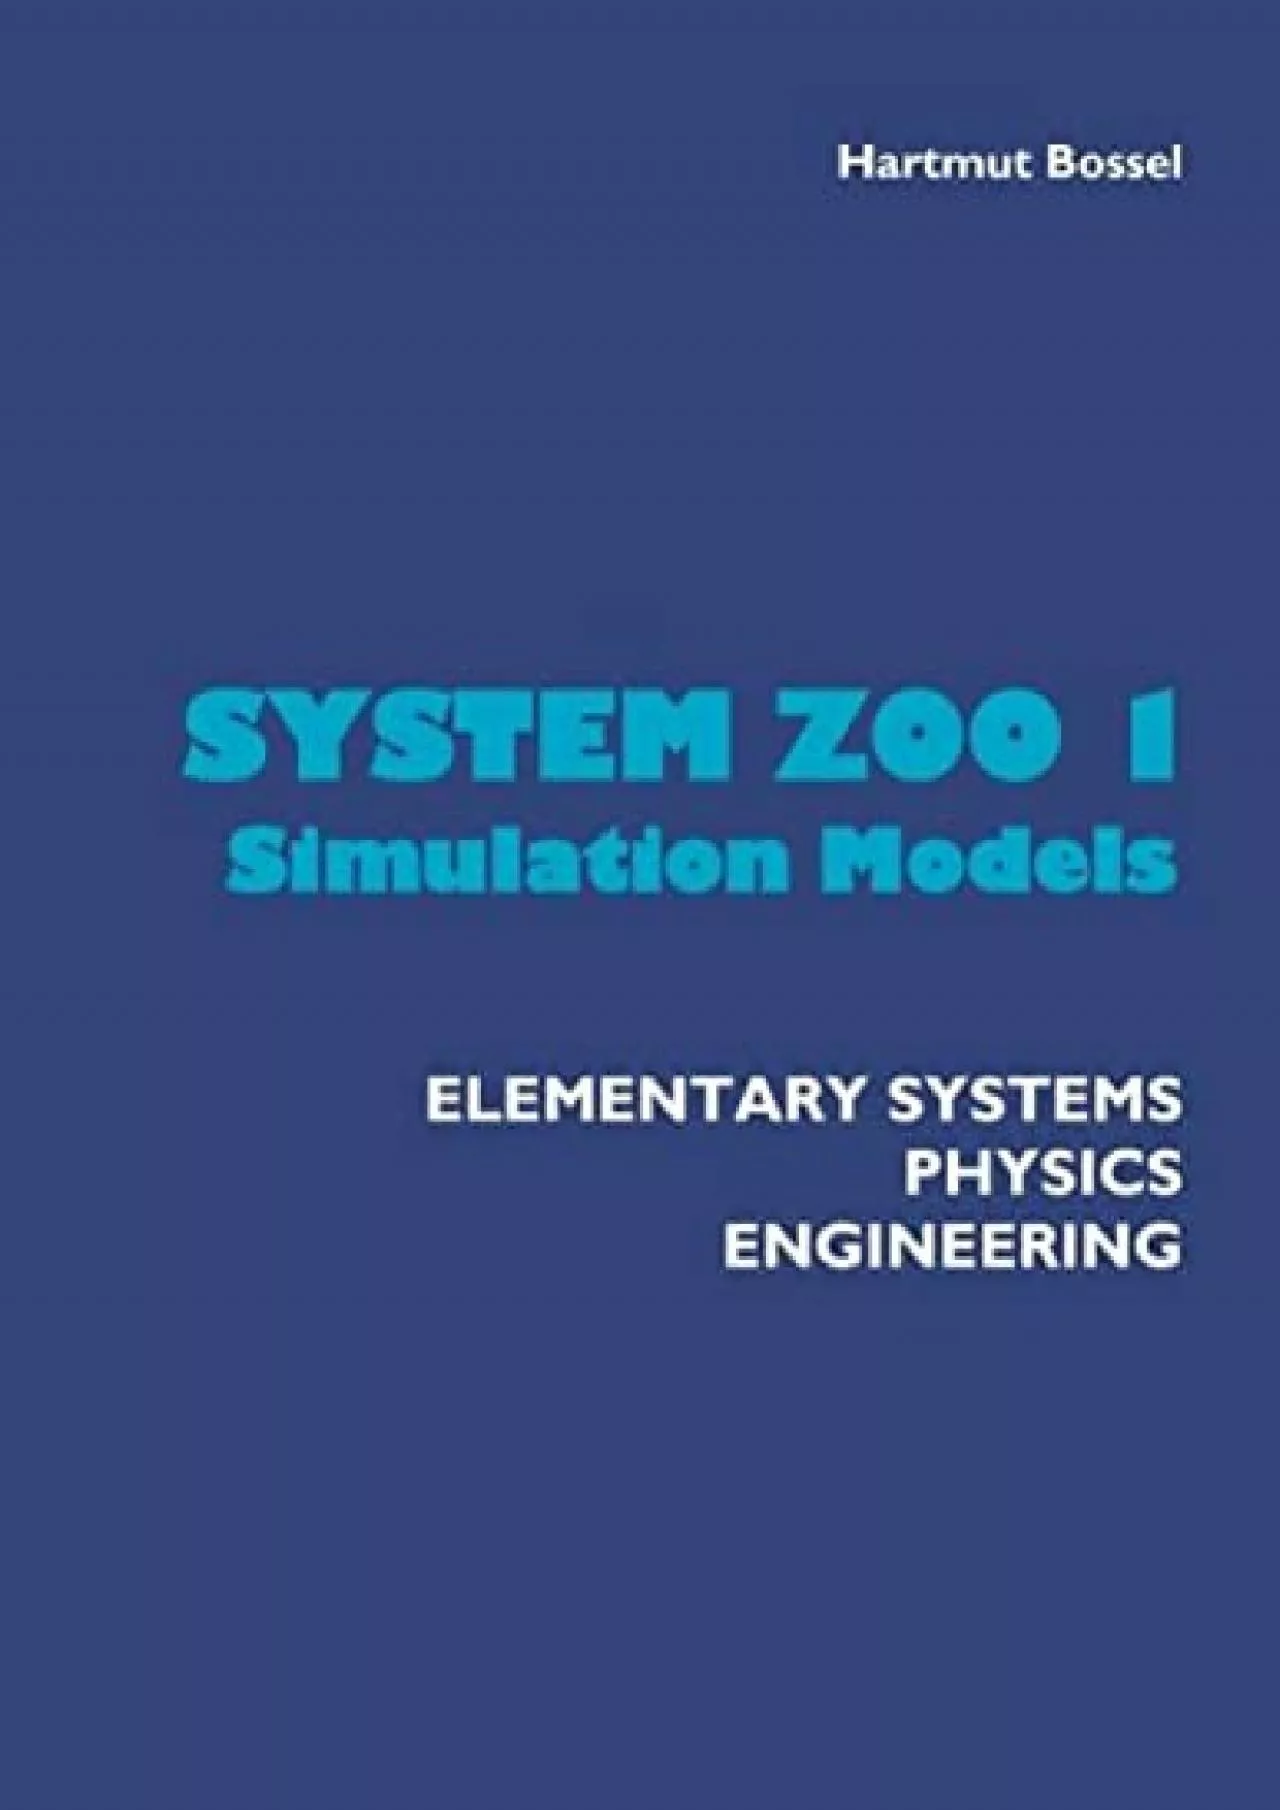 (BOOS)-System Zoo 1 Simulation Models